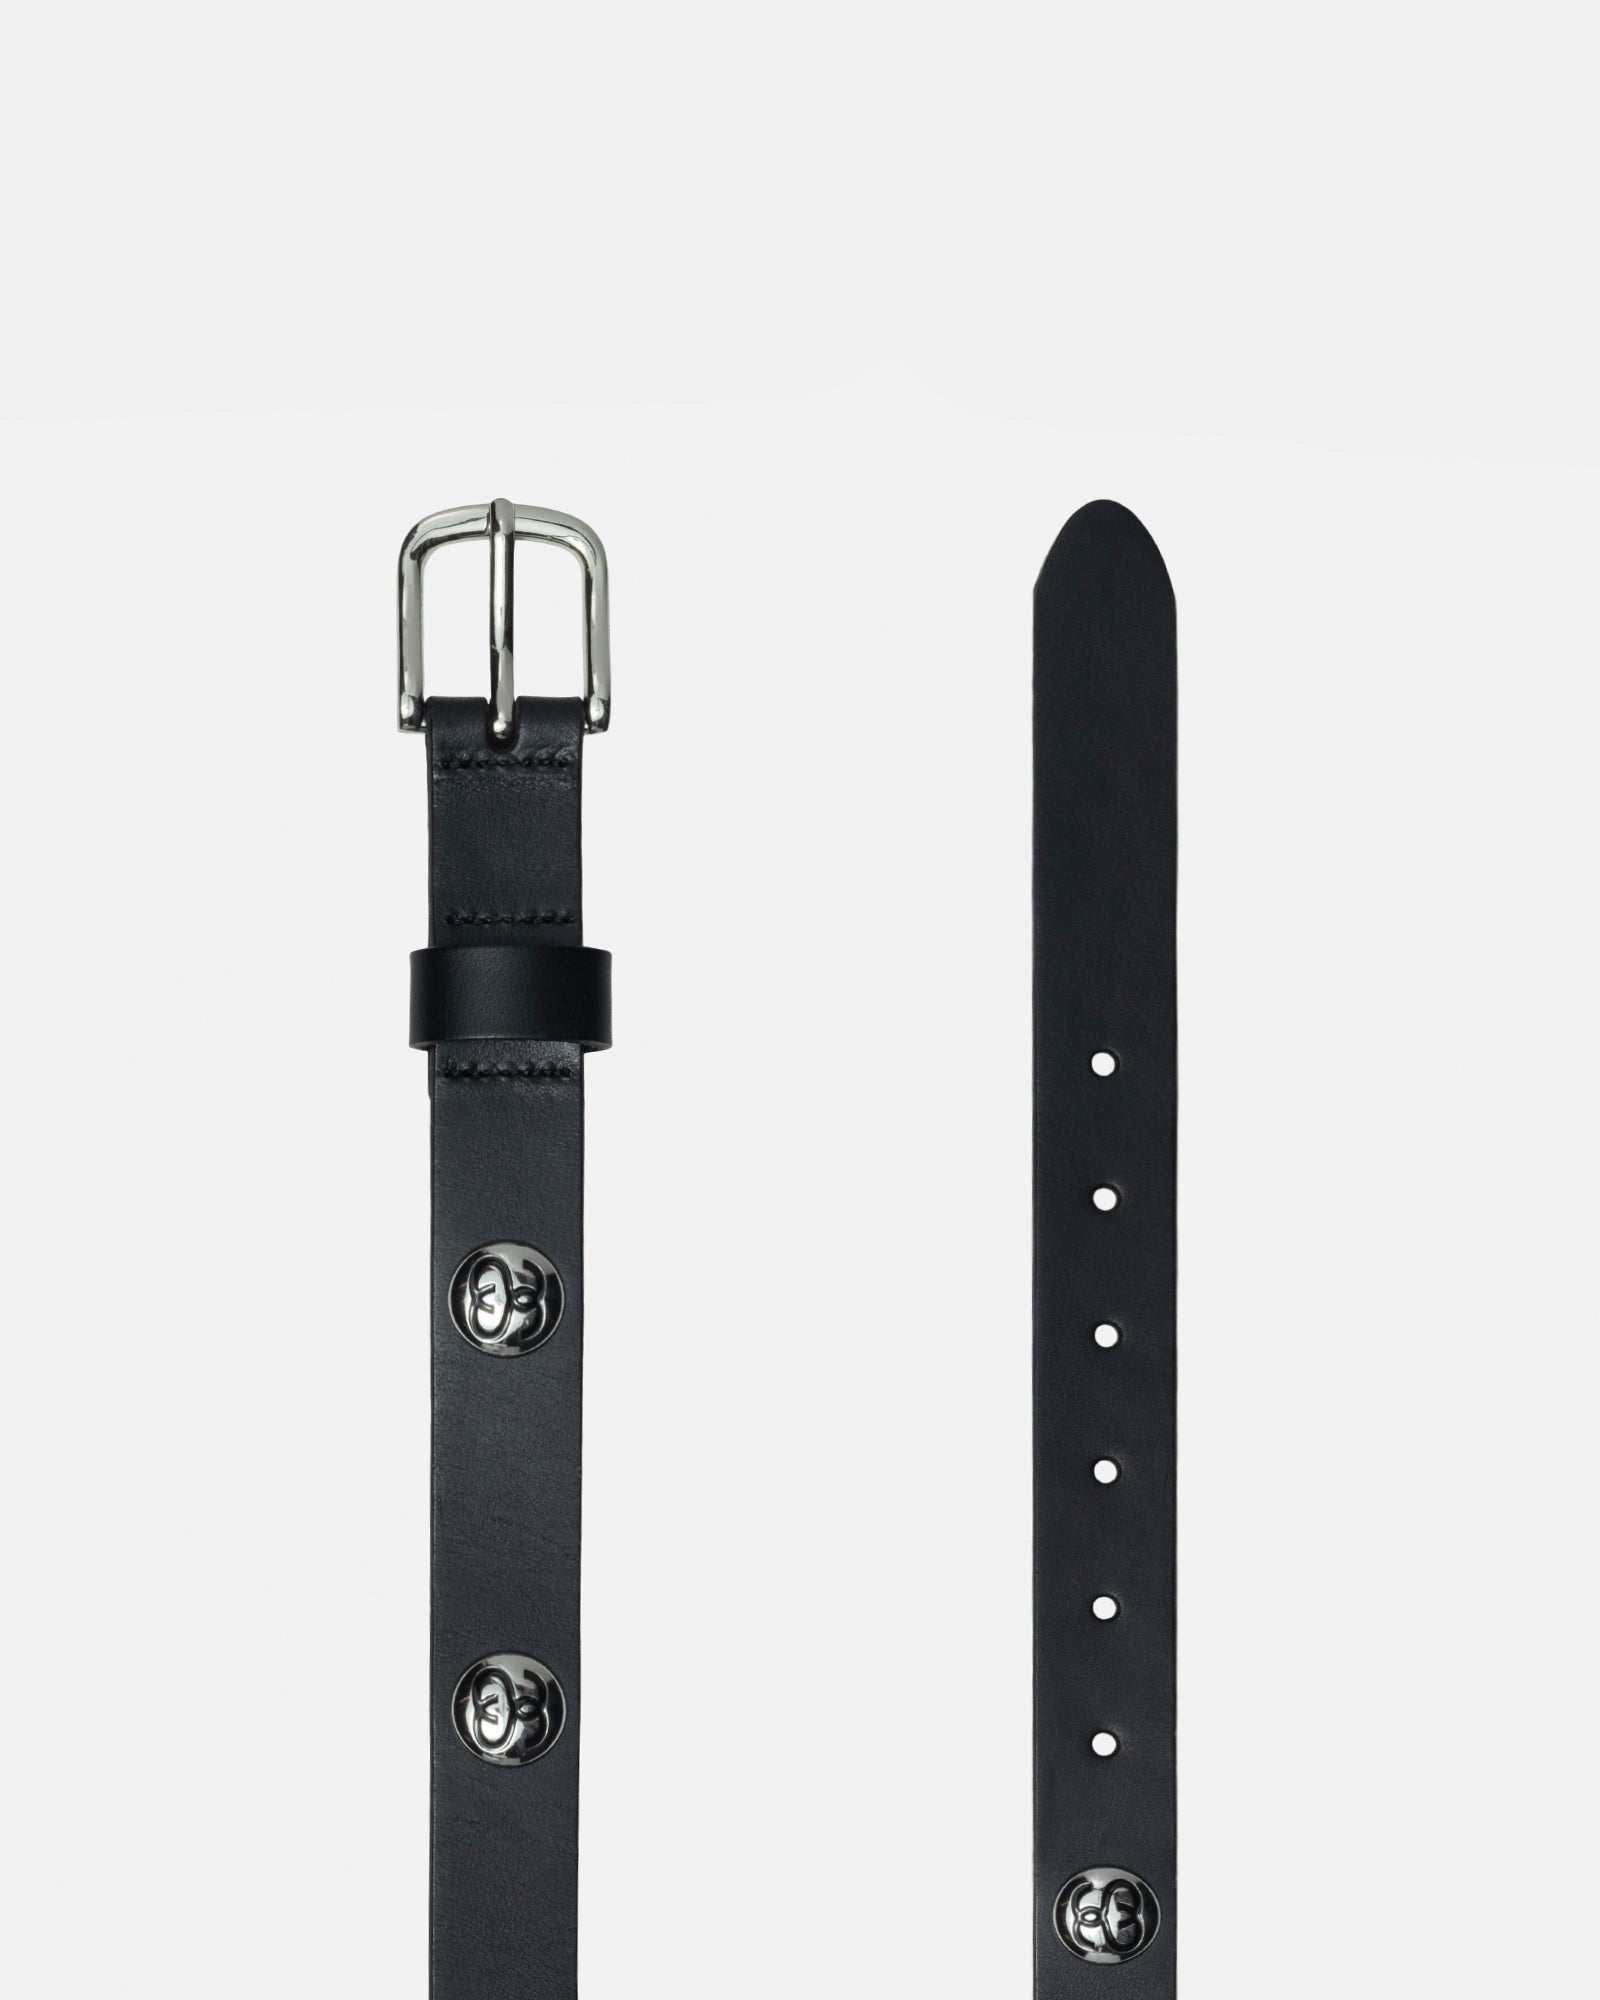 Buy Stussy Belts: New Releases & Iconic Styles